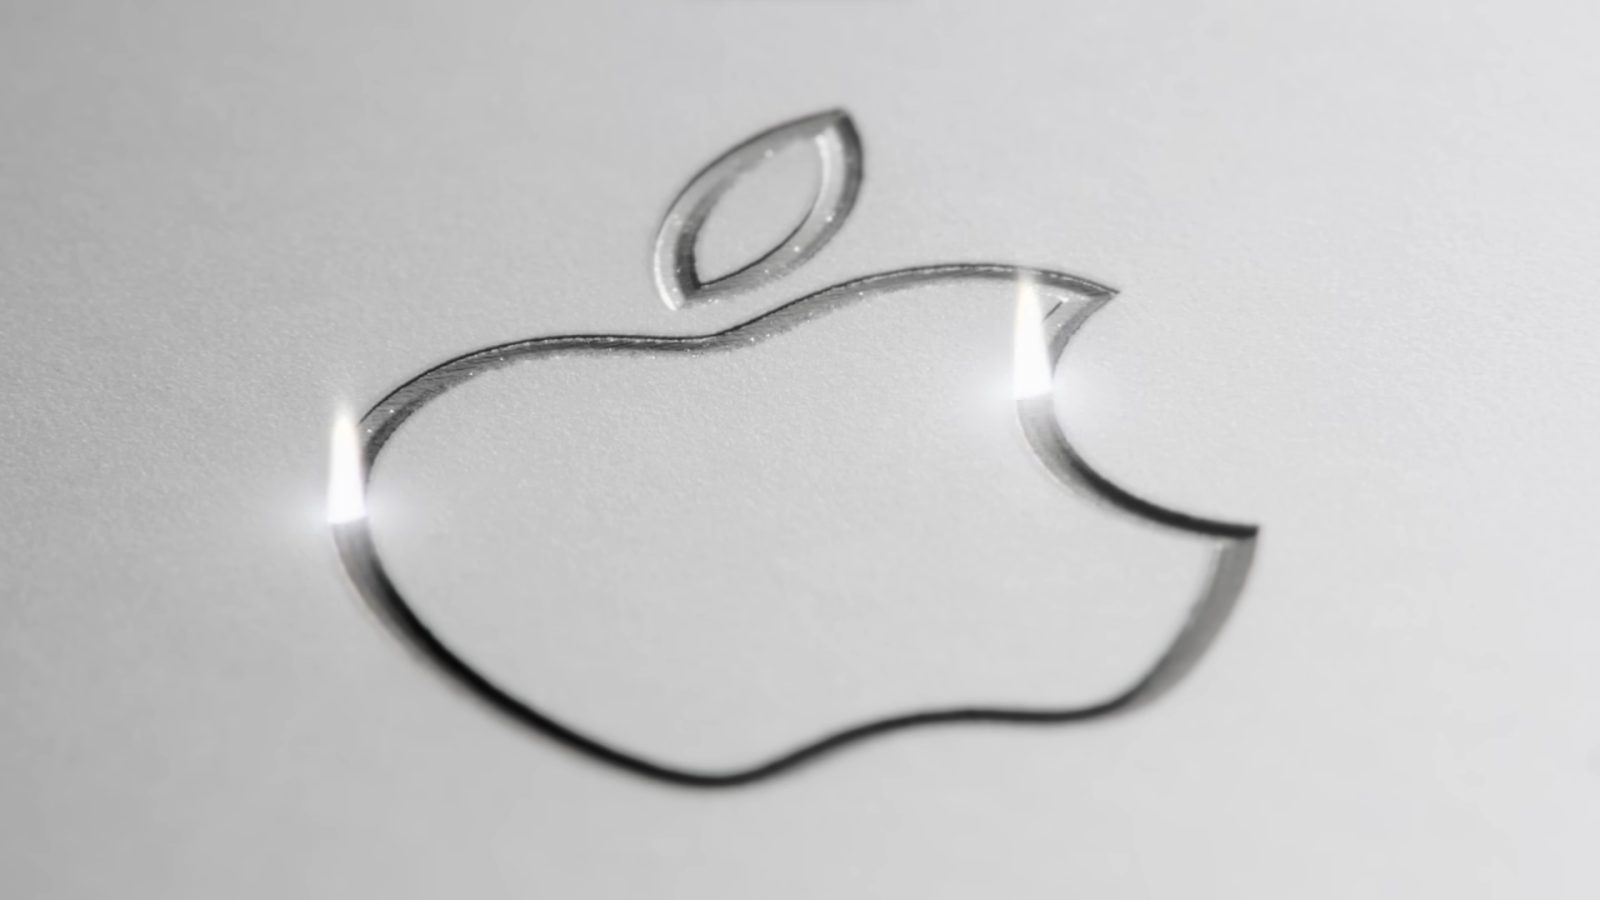 A close-up of the Apple logo embossed on a silver surface with reflective highlights